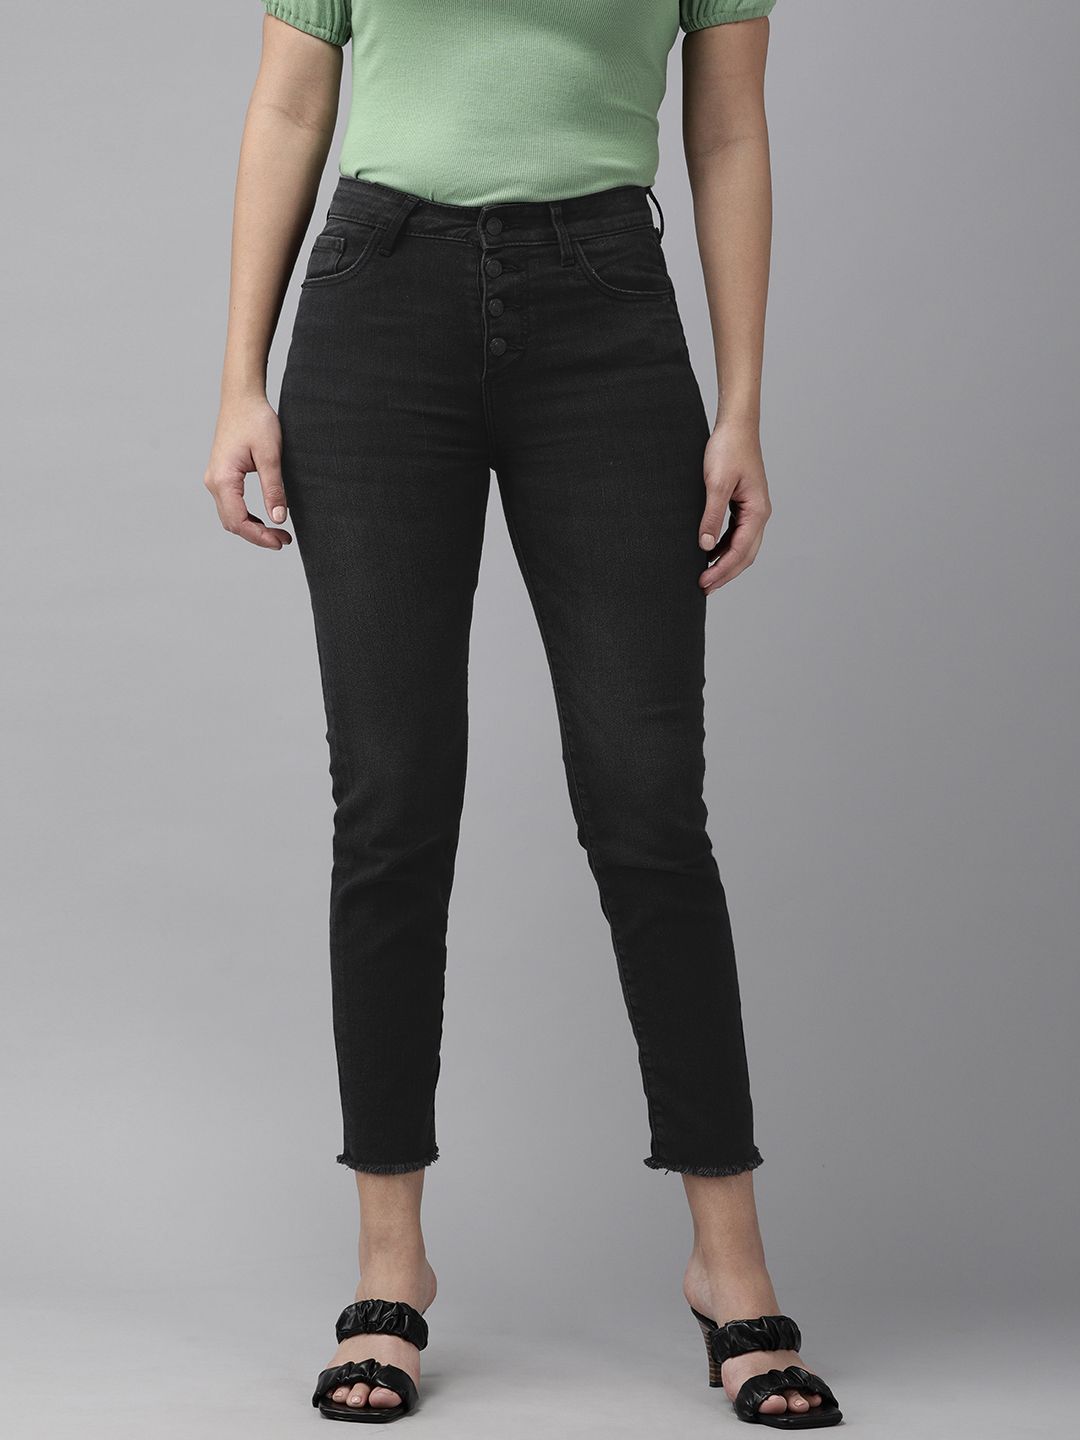 Vero Moda Women Black Straight Fit High-Rise Stretchable Jeans Price in India